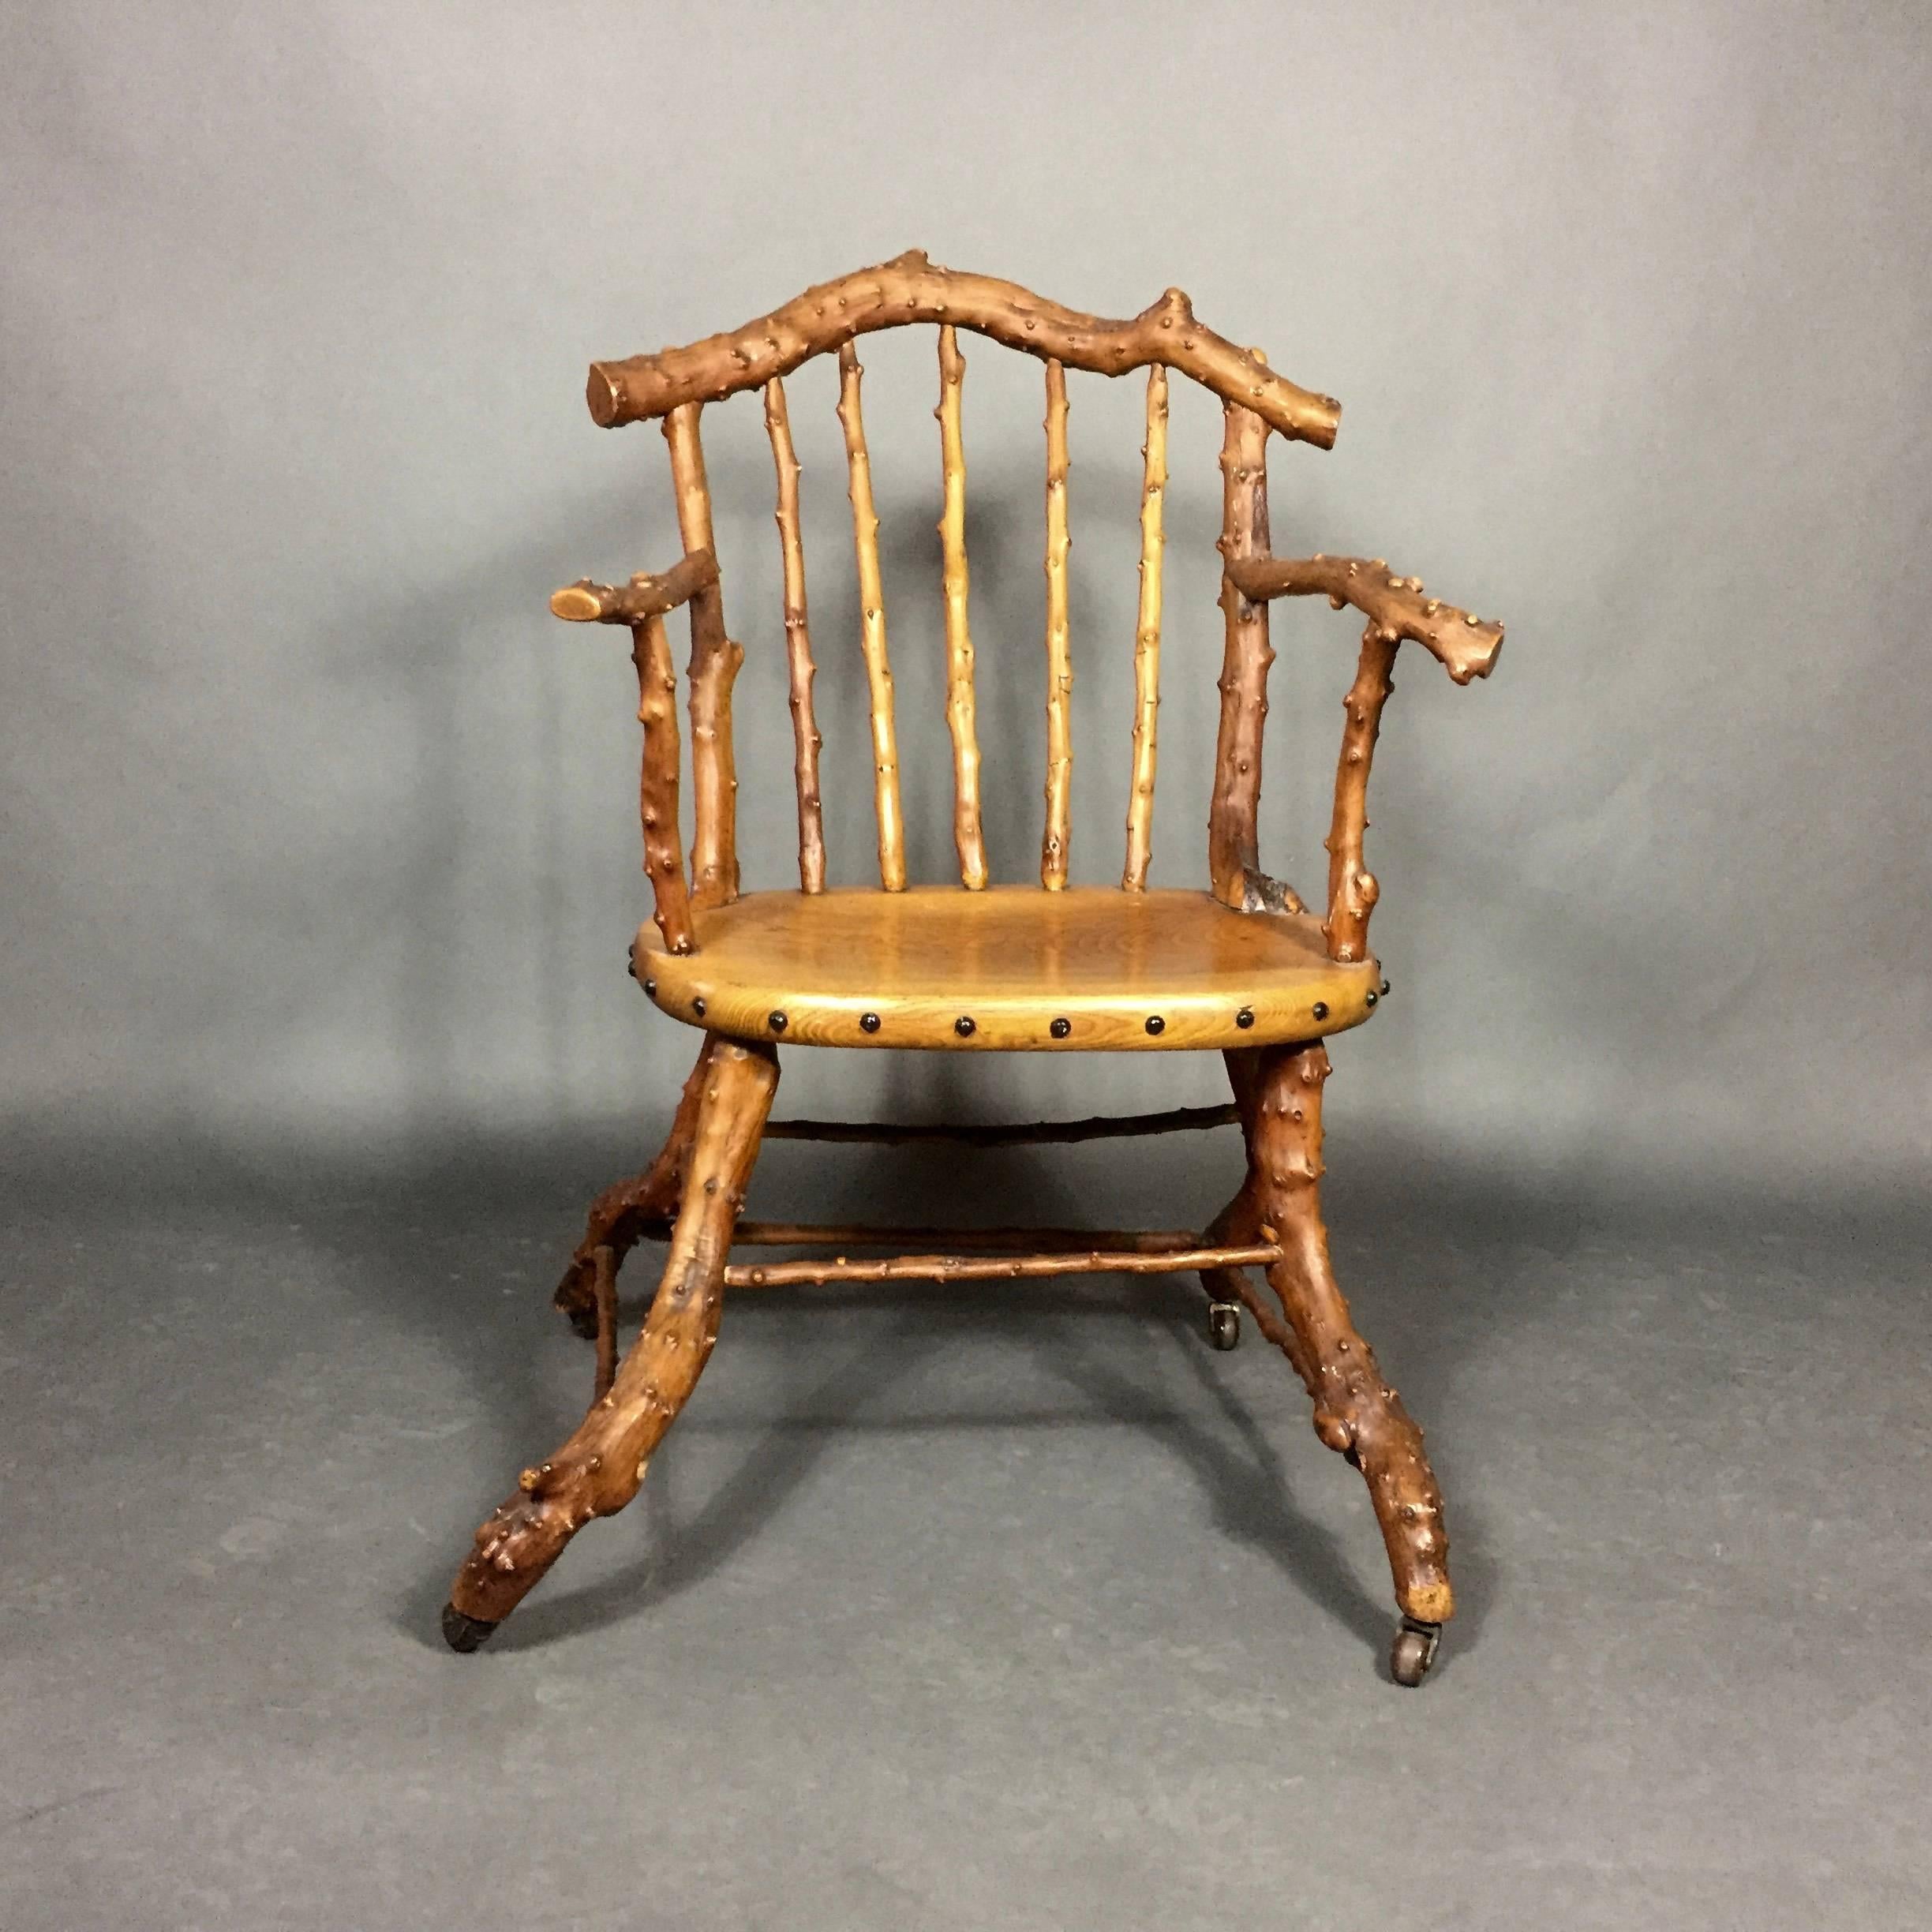 A rare and beautiful example of English, 19th century Victorian Arts and Crafts workmanship - armchair in the Windsor style using knotty yew wood for arms, back and legs - gorgeous polished chestnut seat, original casters. England, mid-1800s.